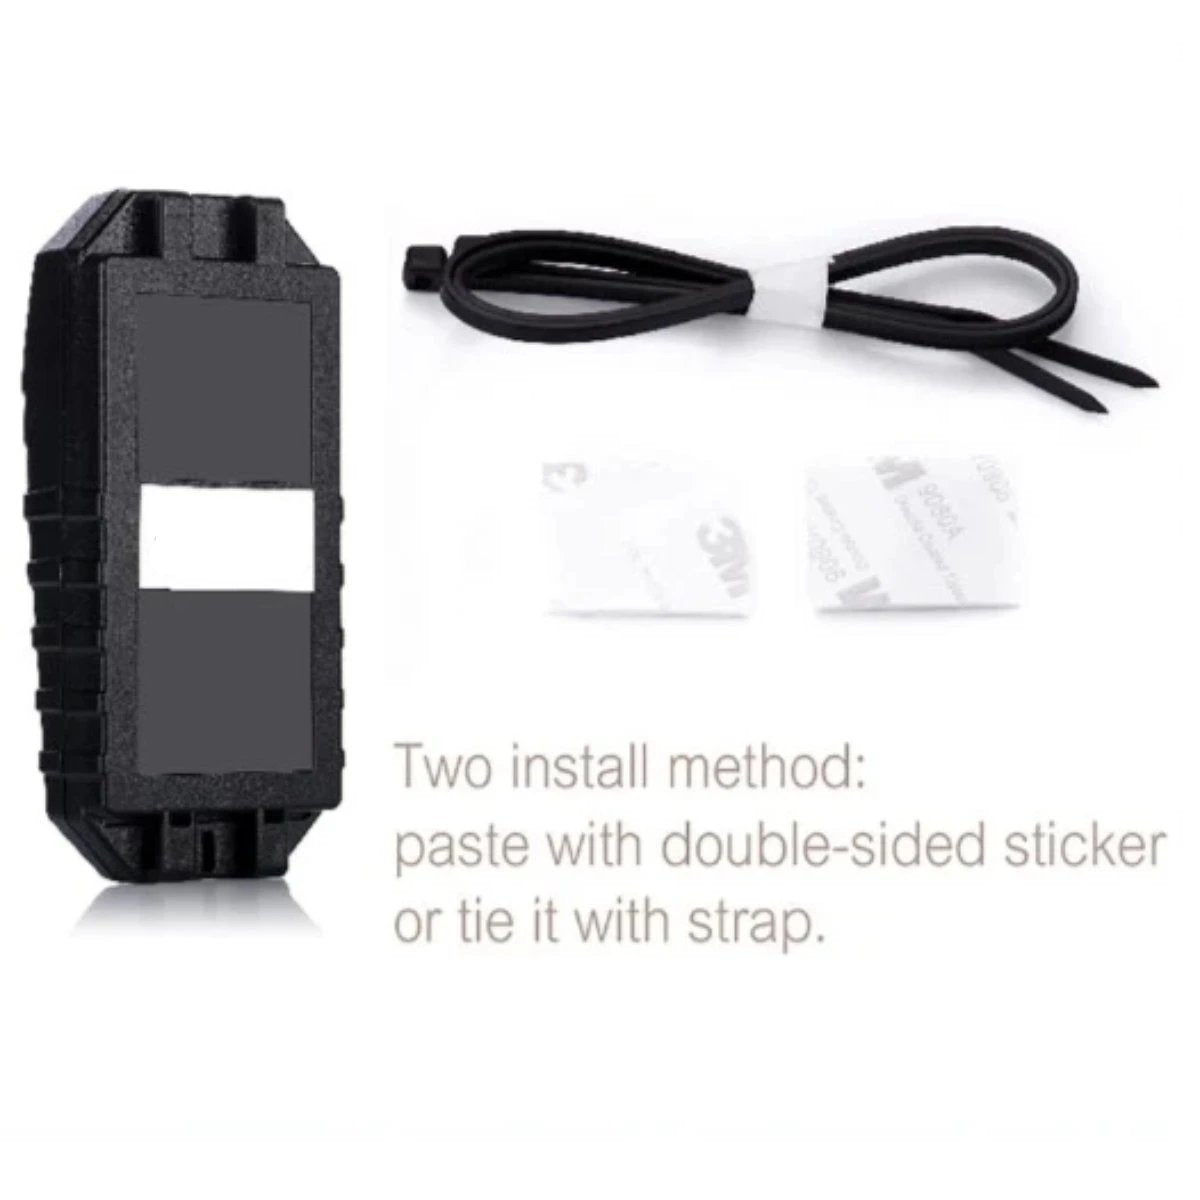 Two Motorcycle Waterproof 113dB Wireless Anti-Theft Remote Alarm installation methods utilizing double sided sticker.